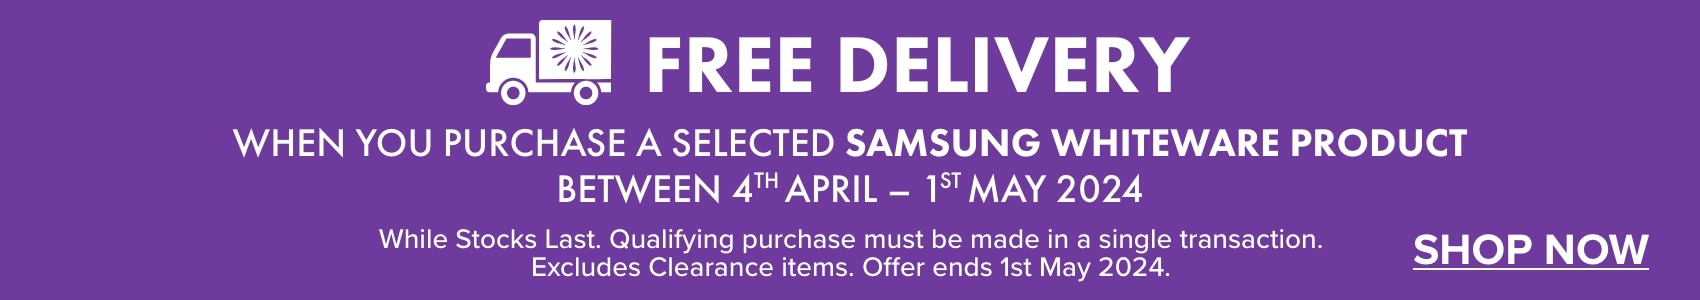 FREE DELIVERY when you purchase a selected Samsung Whiteware Product between 4th April – 1st May 2024